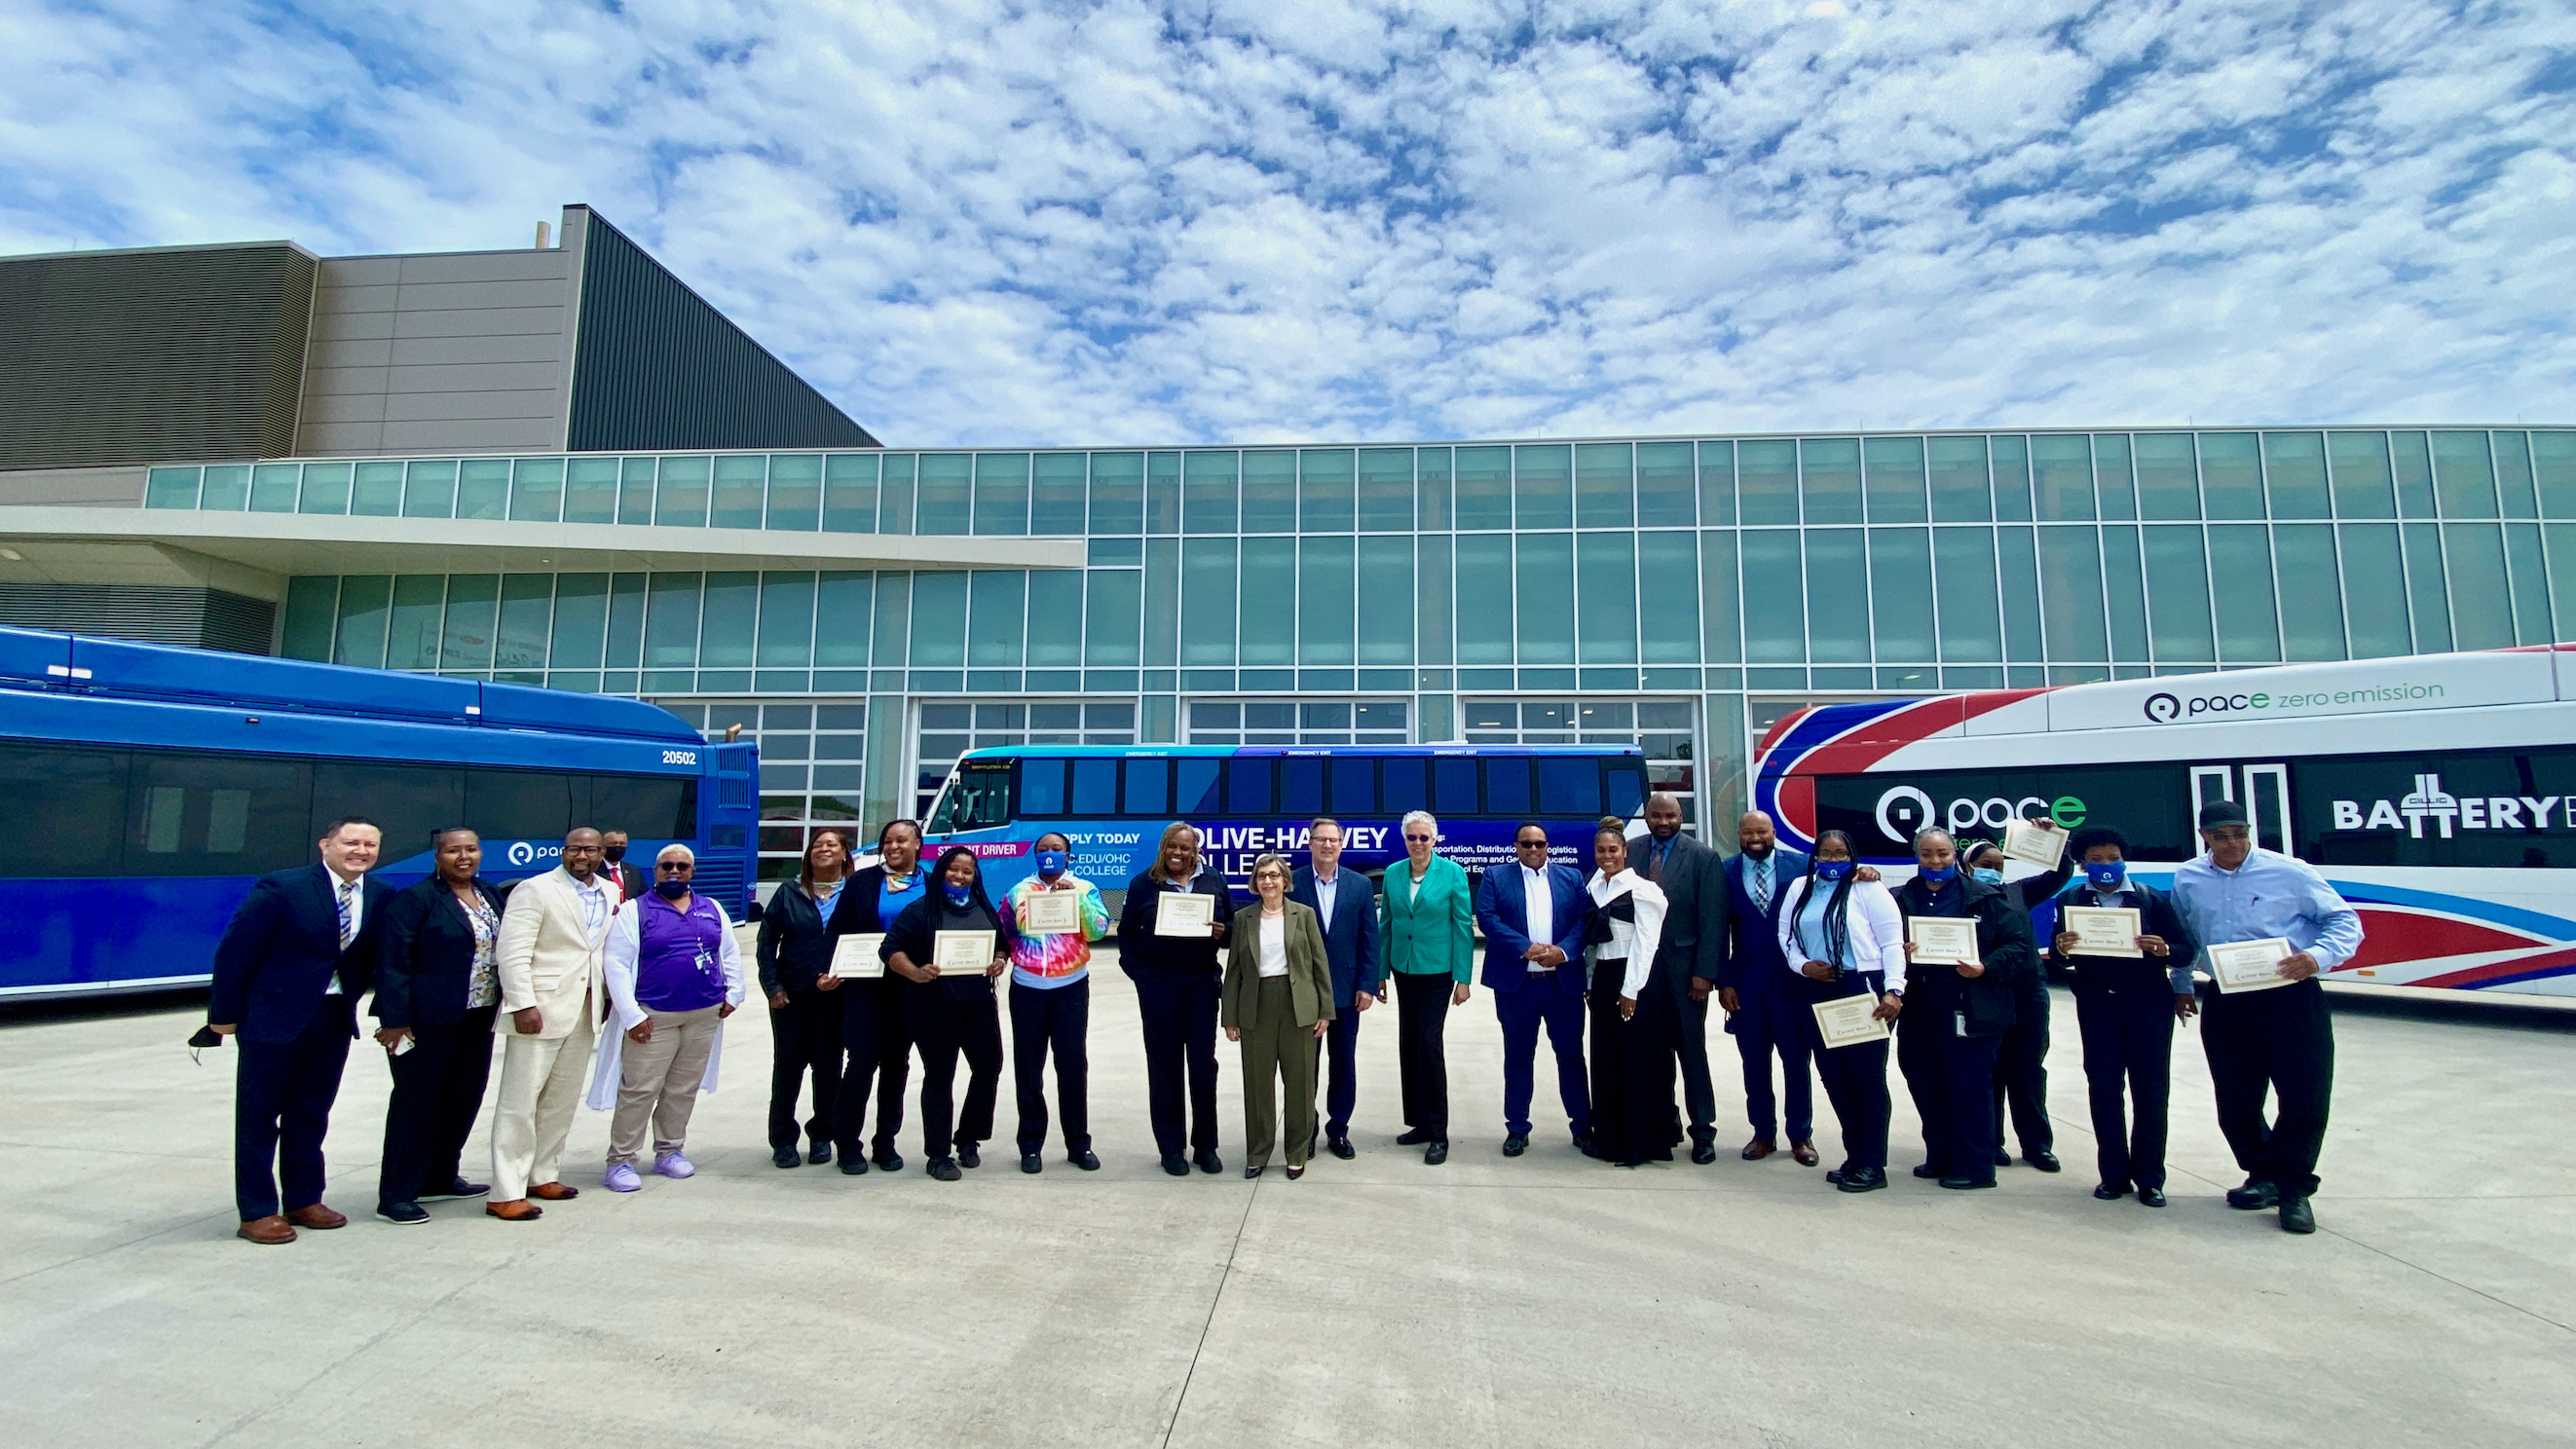 officials pose in front of buses with graduates showing their diplomas